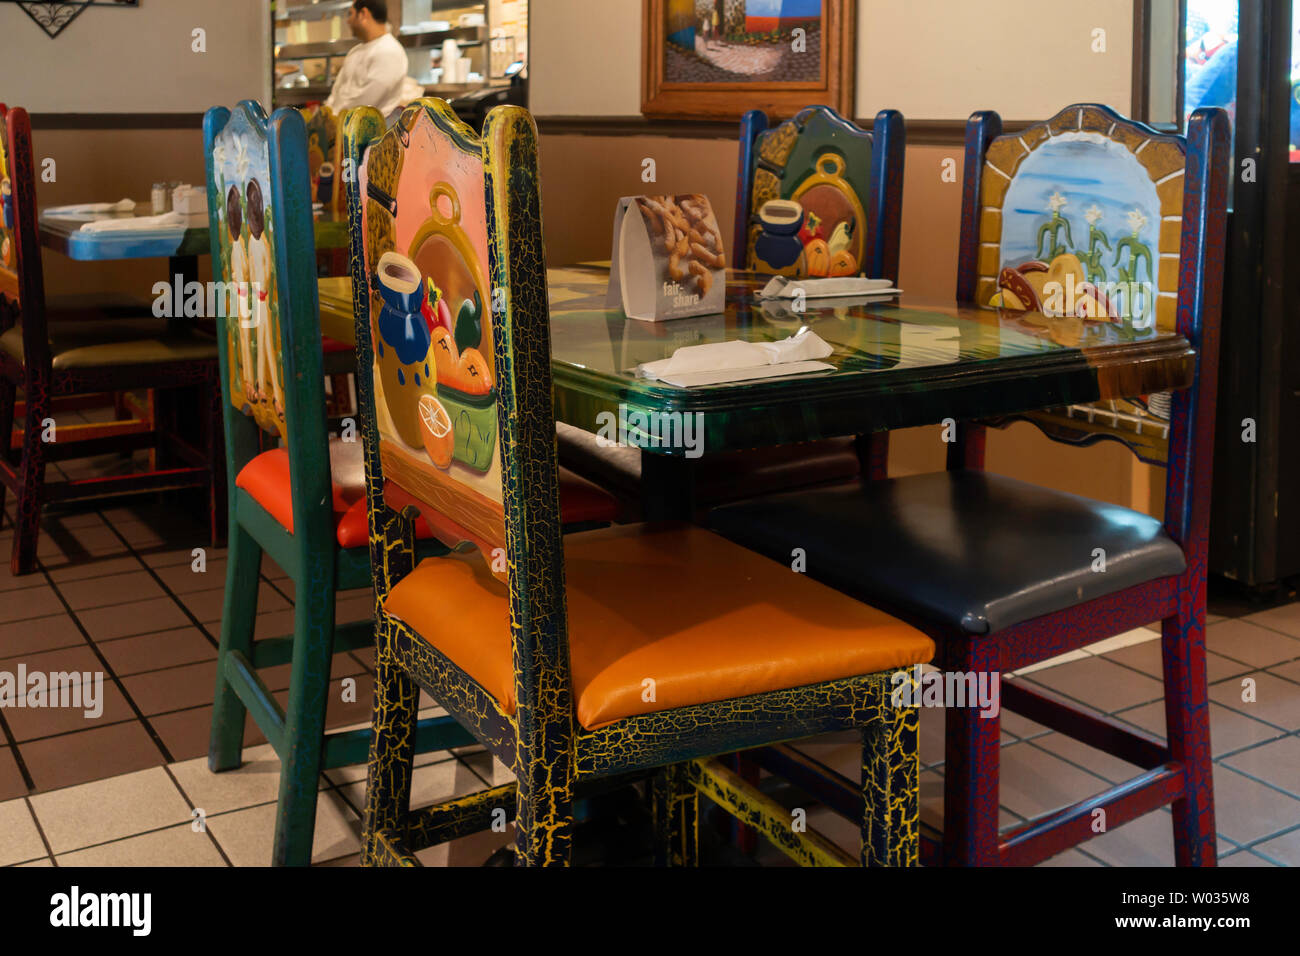 Decor of a Mexican restaurant showing colorfully designed chairs, tables and Mexican decor. Cook in the background. Arkansas, USA. Stock Photo